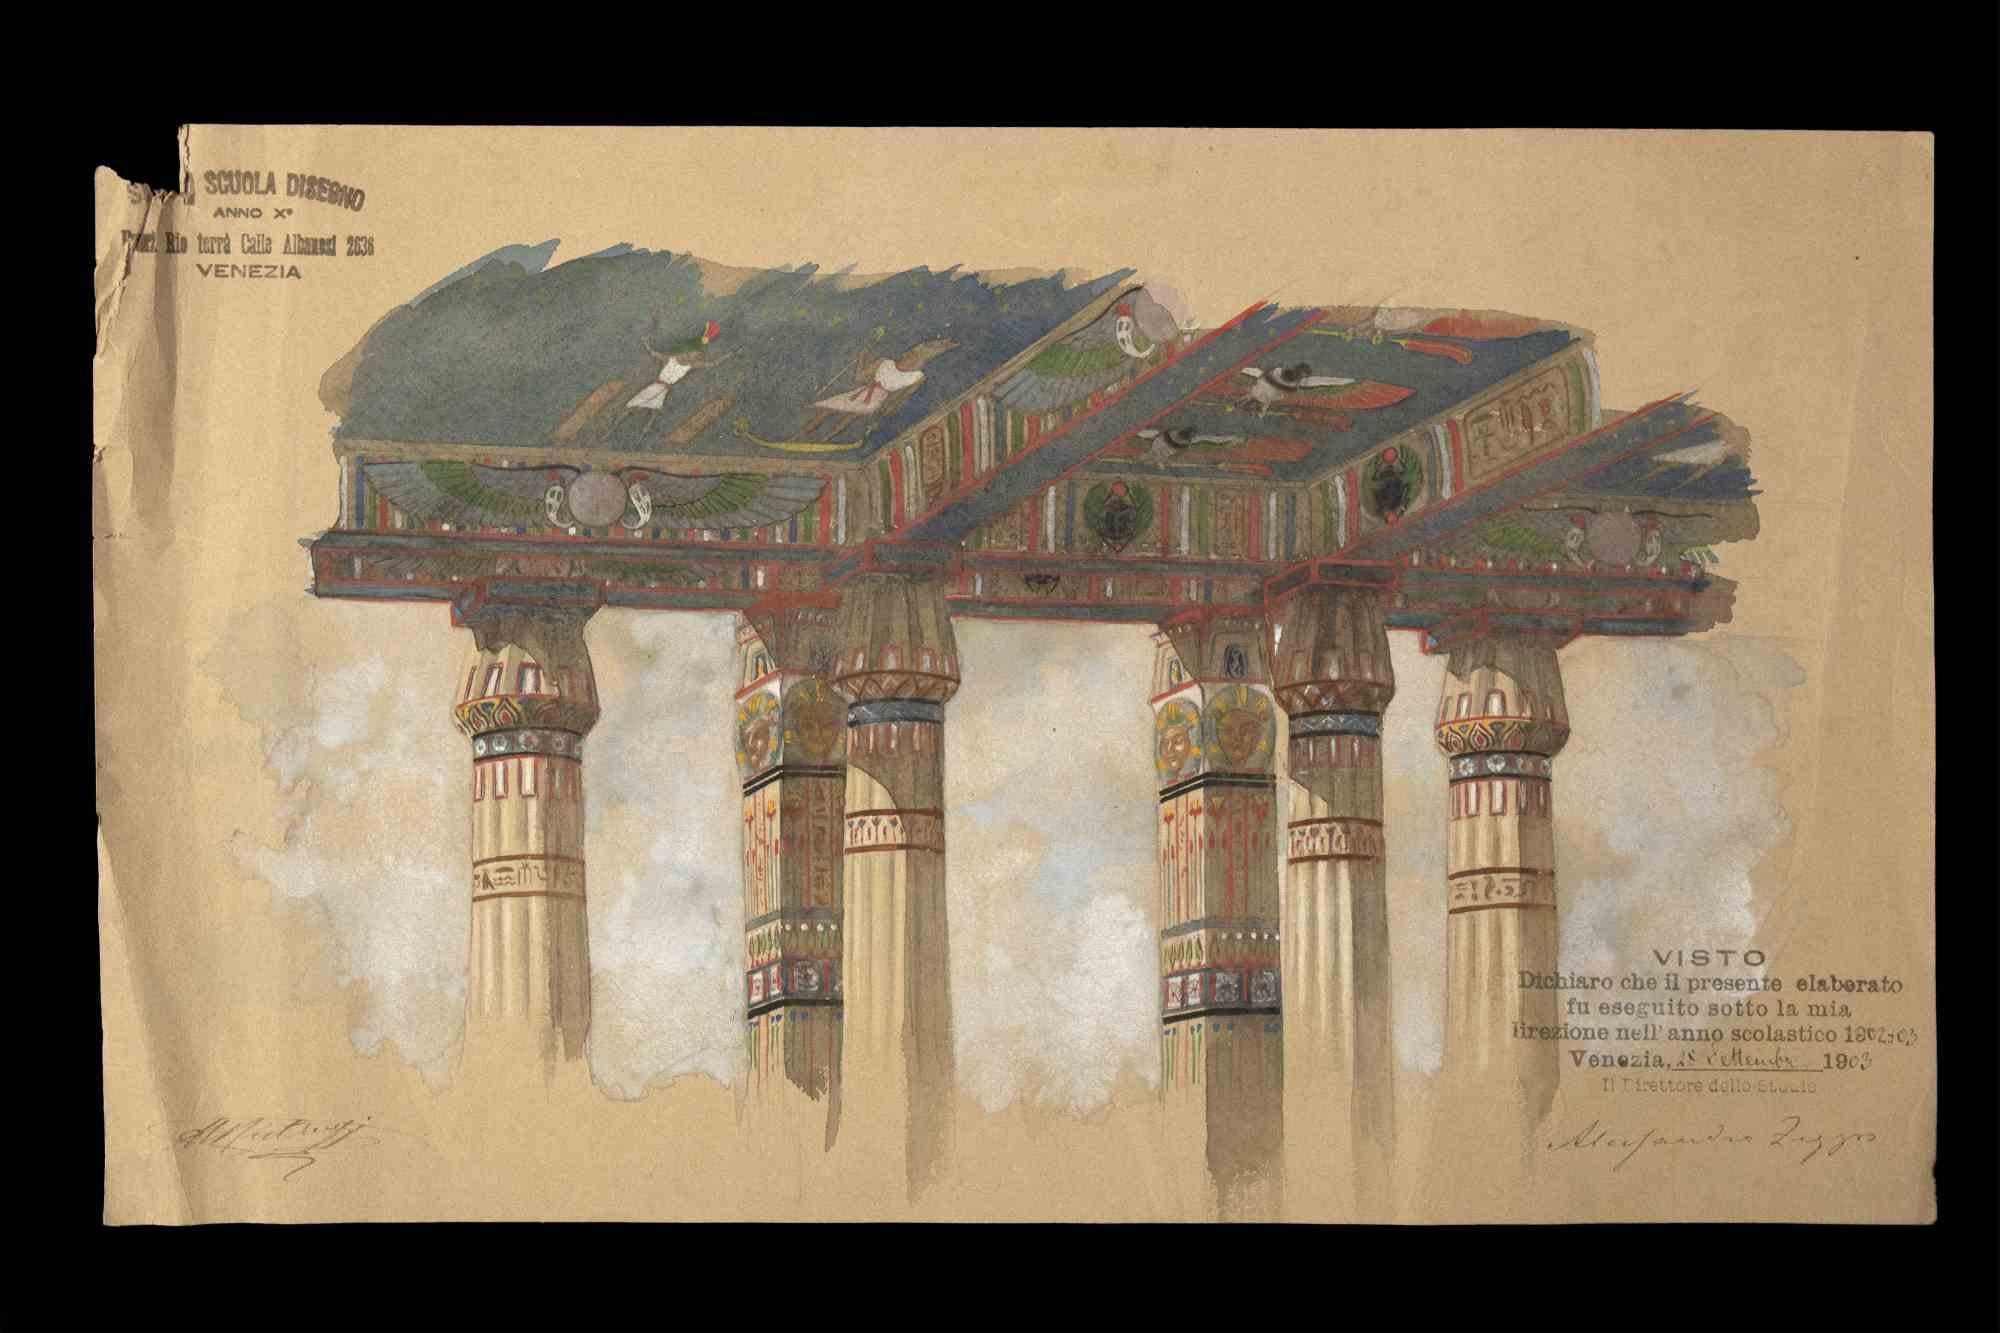 Unknown Figurative Art - Sketch of Egyptian Temple - Original Pastel Drawing - Early 20th Century